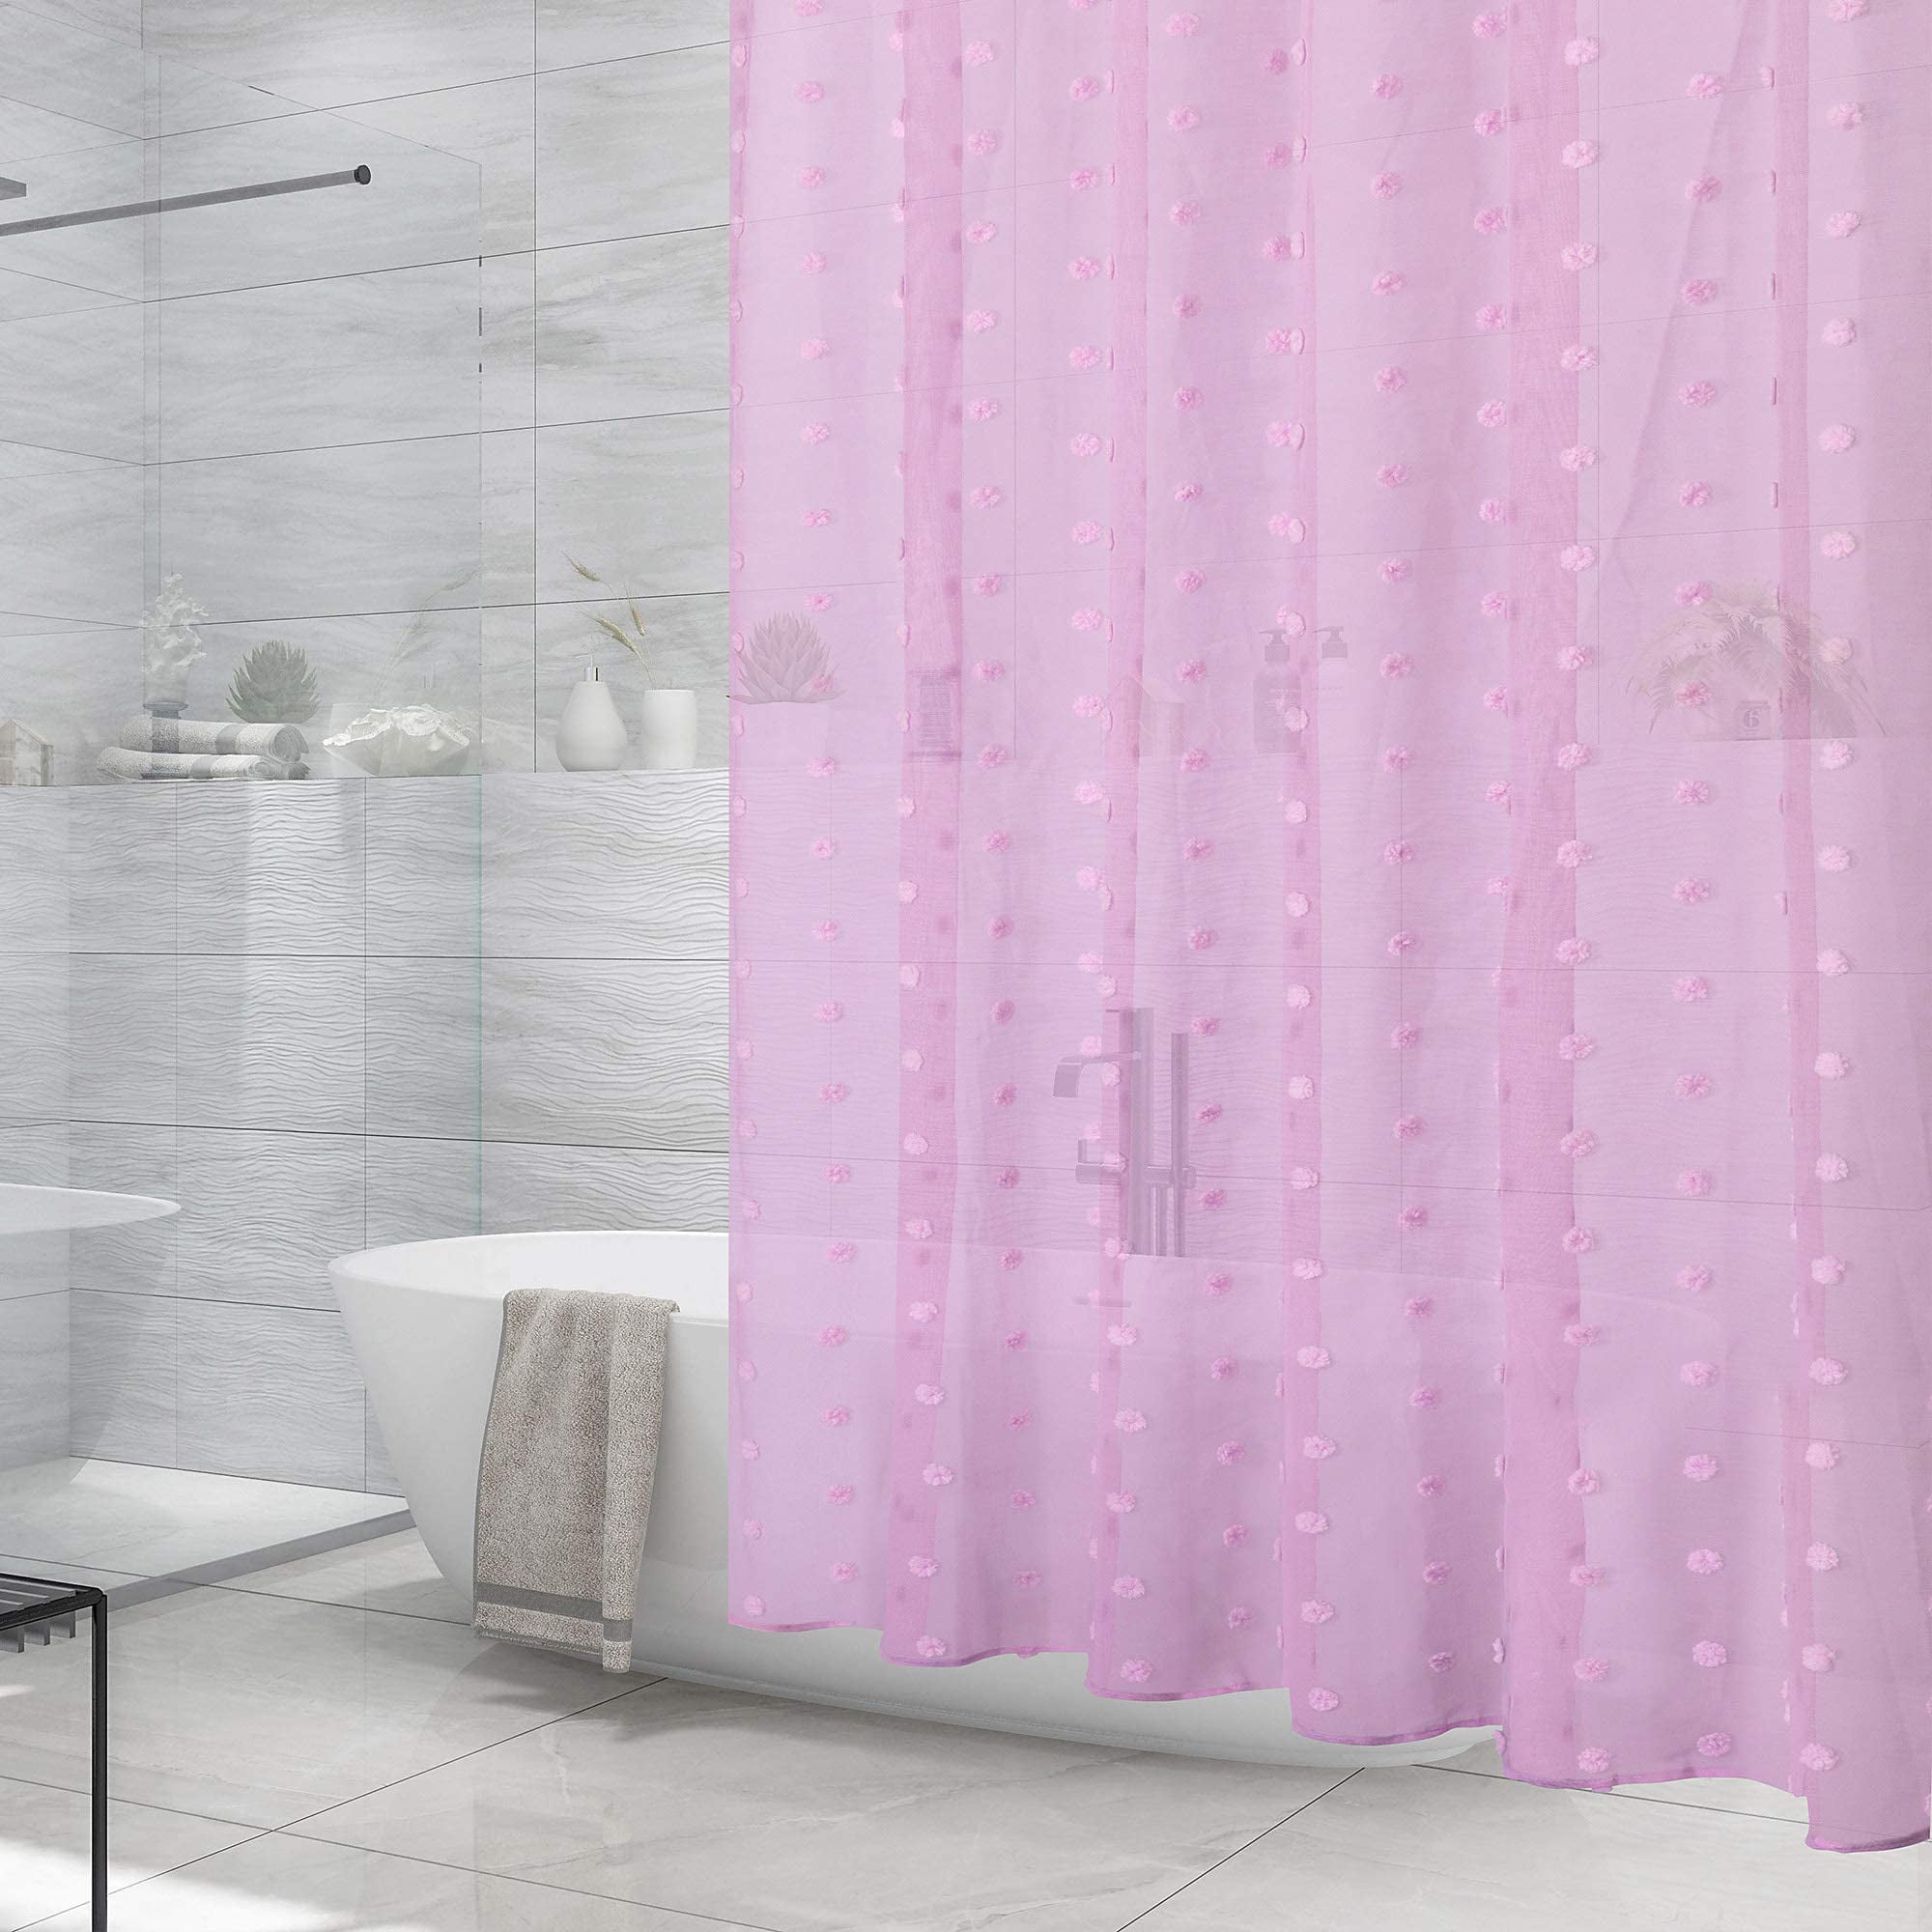 Details about   Waterproof Palm Leaf Print Shower Curtain Sheer Panel BATH Hook Extra Long 